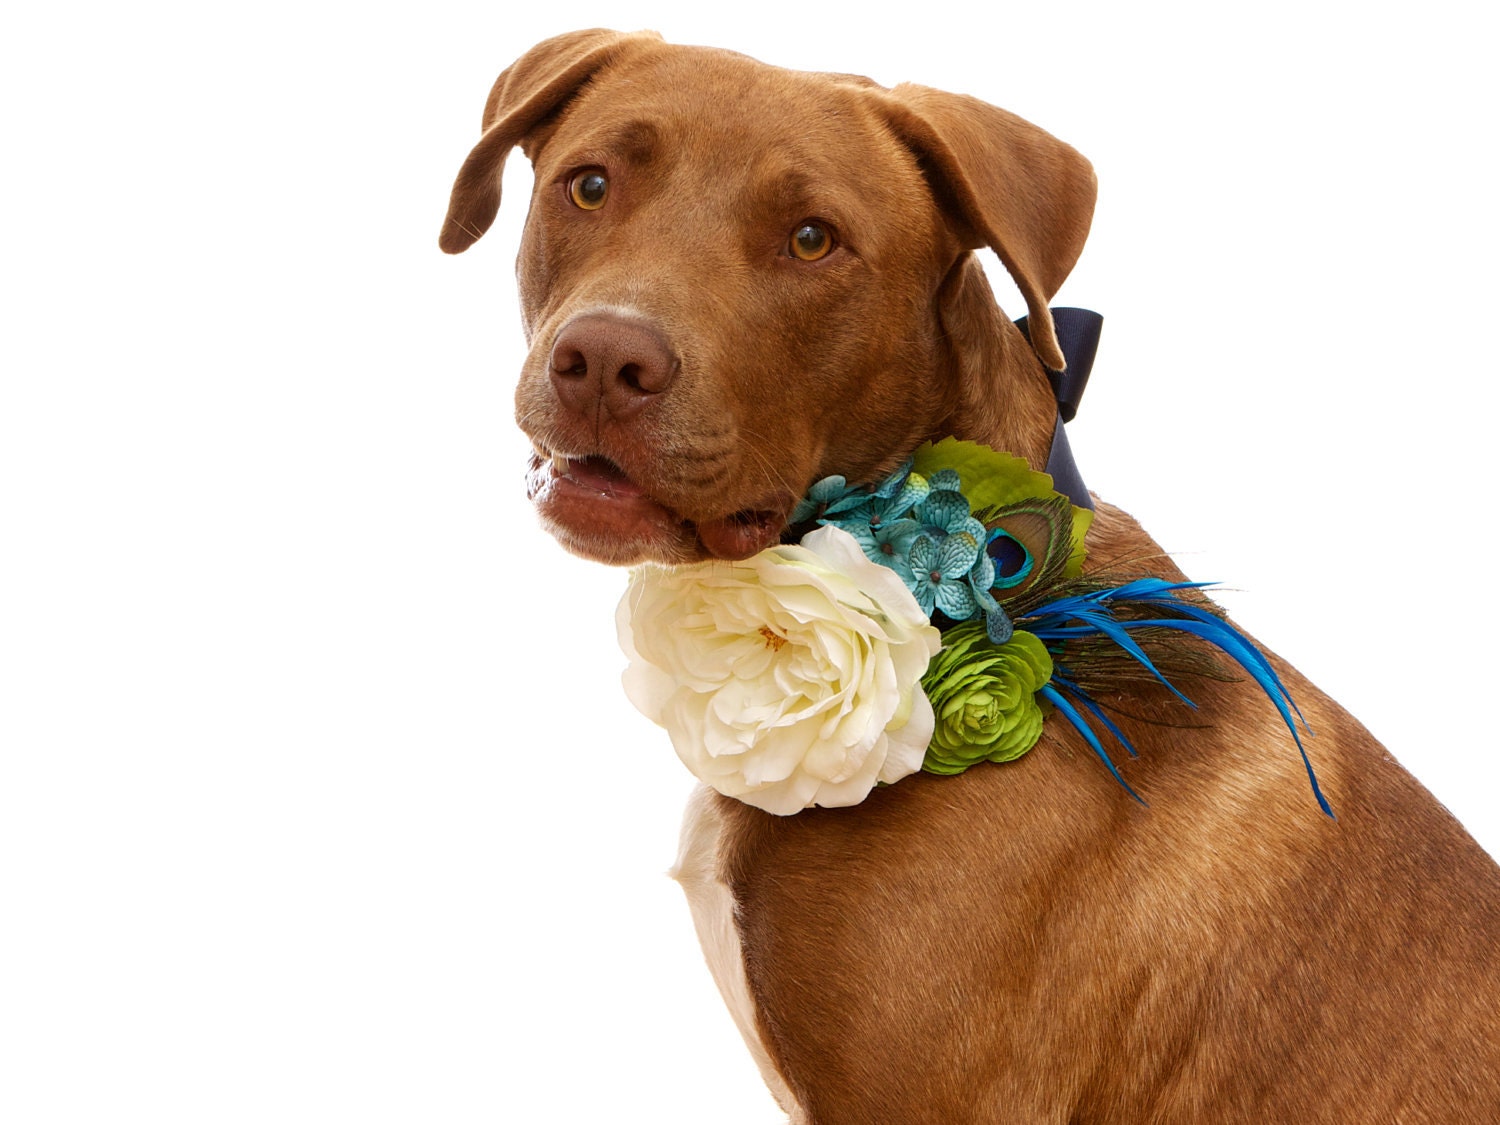 Custom Floral and Satin Canine Wedding Corsage for Dogs: Shown in Navy, Aqua, Teal and Spring Green with Peacock Accents